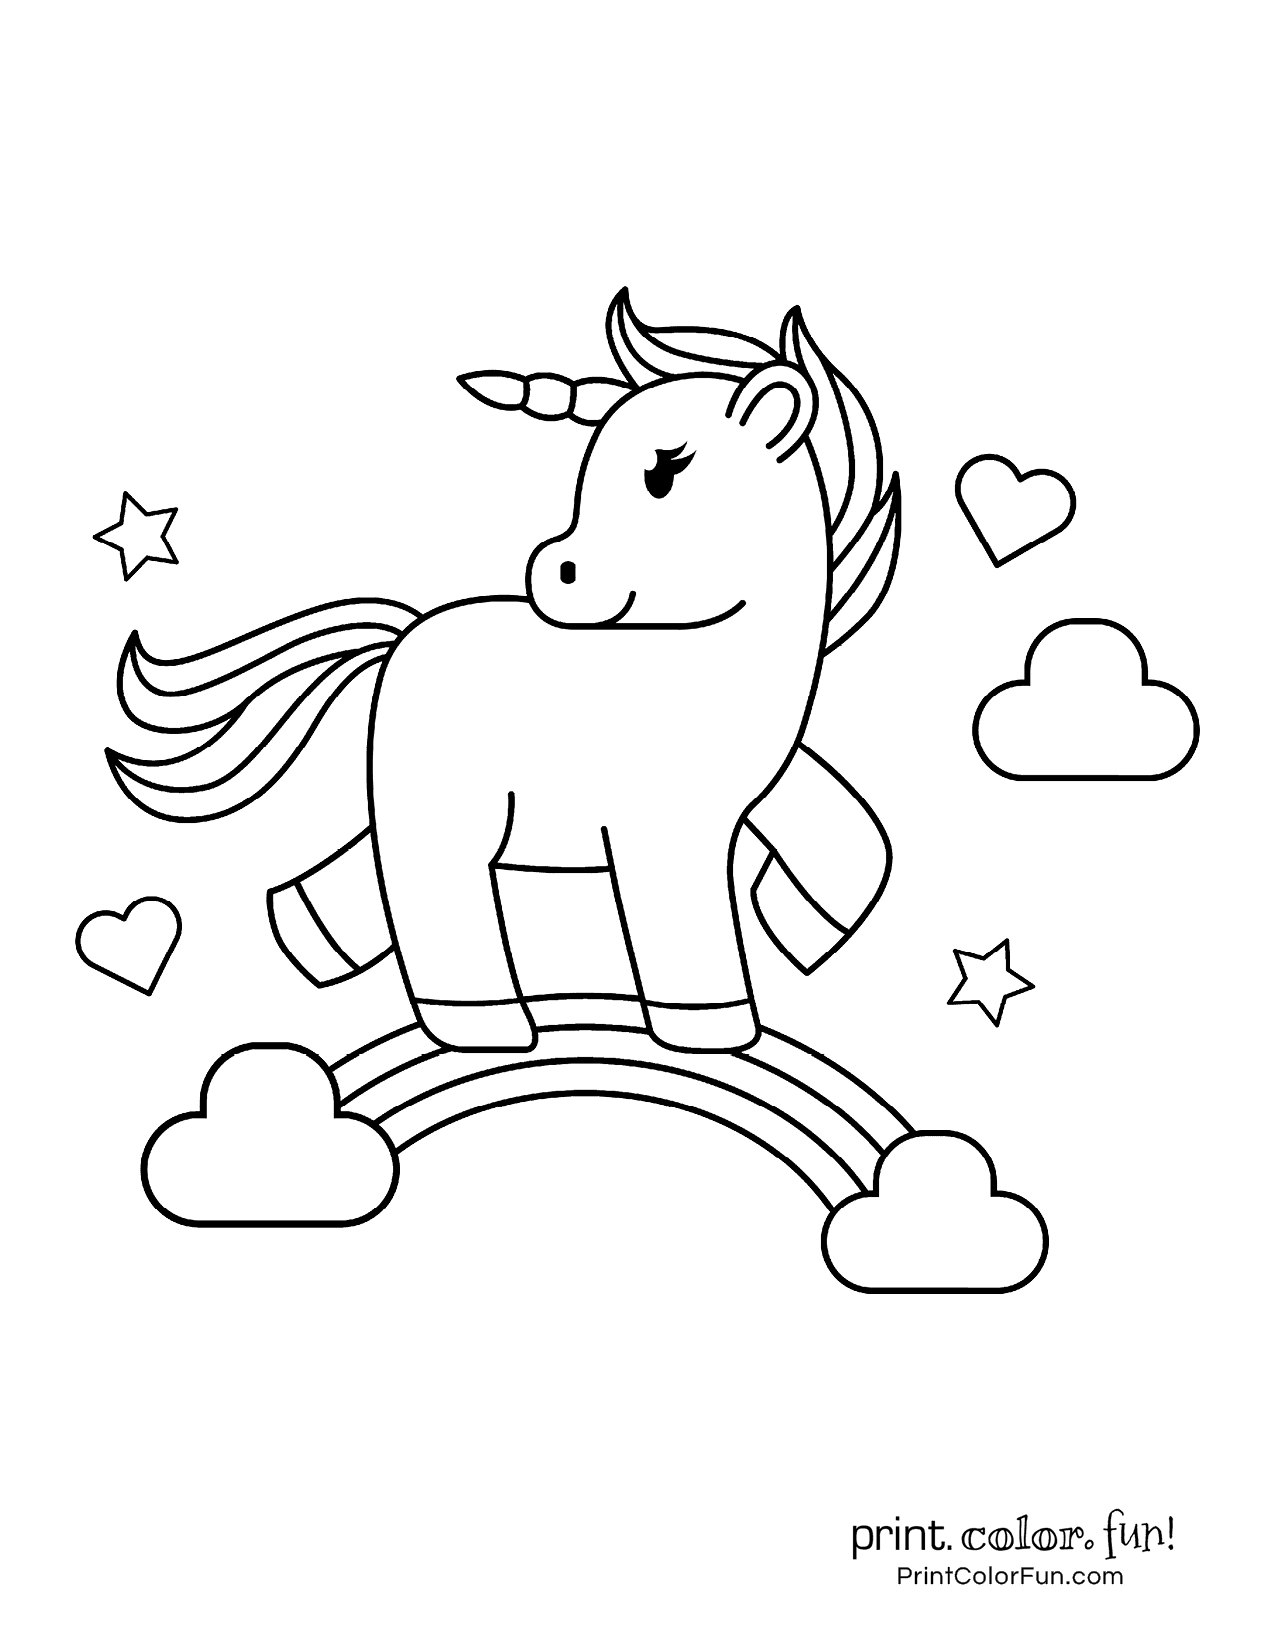 Cute my little unicorn different coloring pages to print at